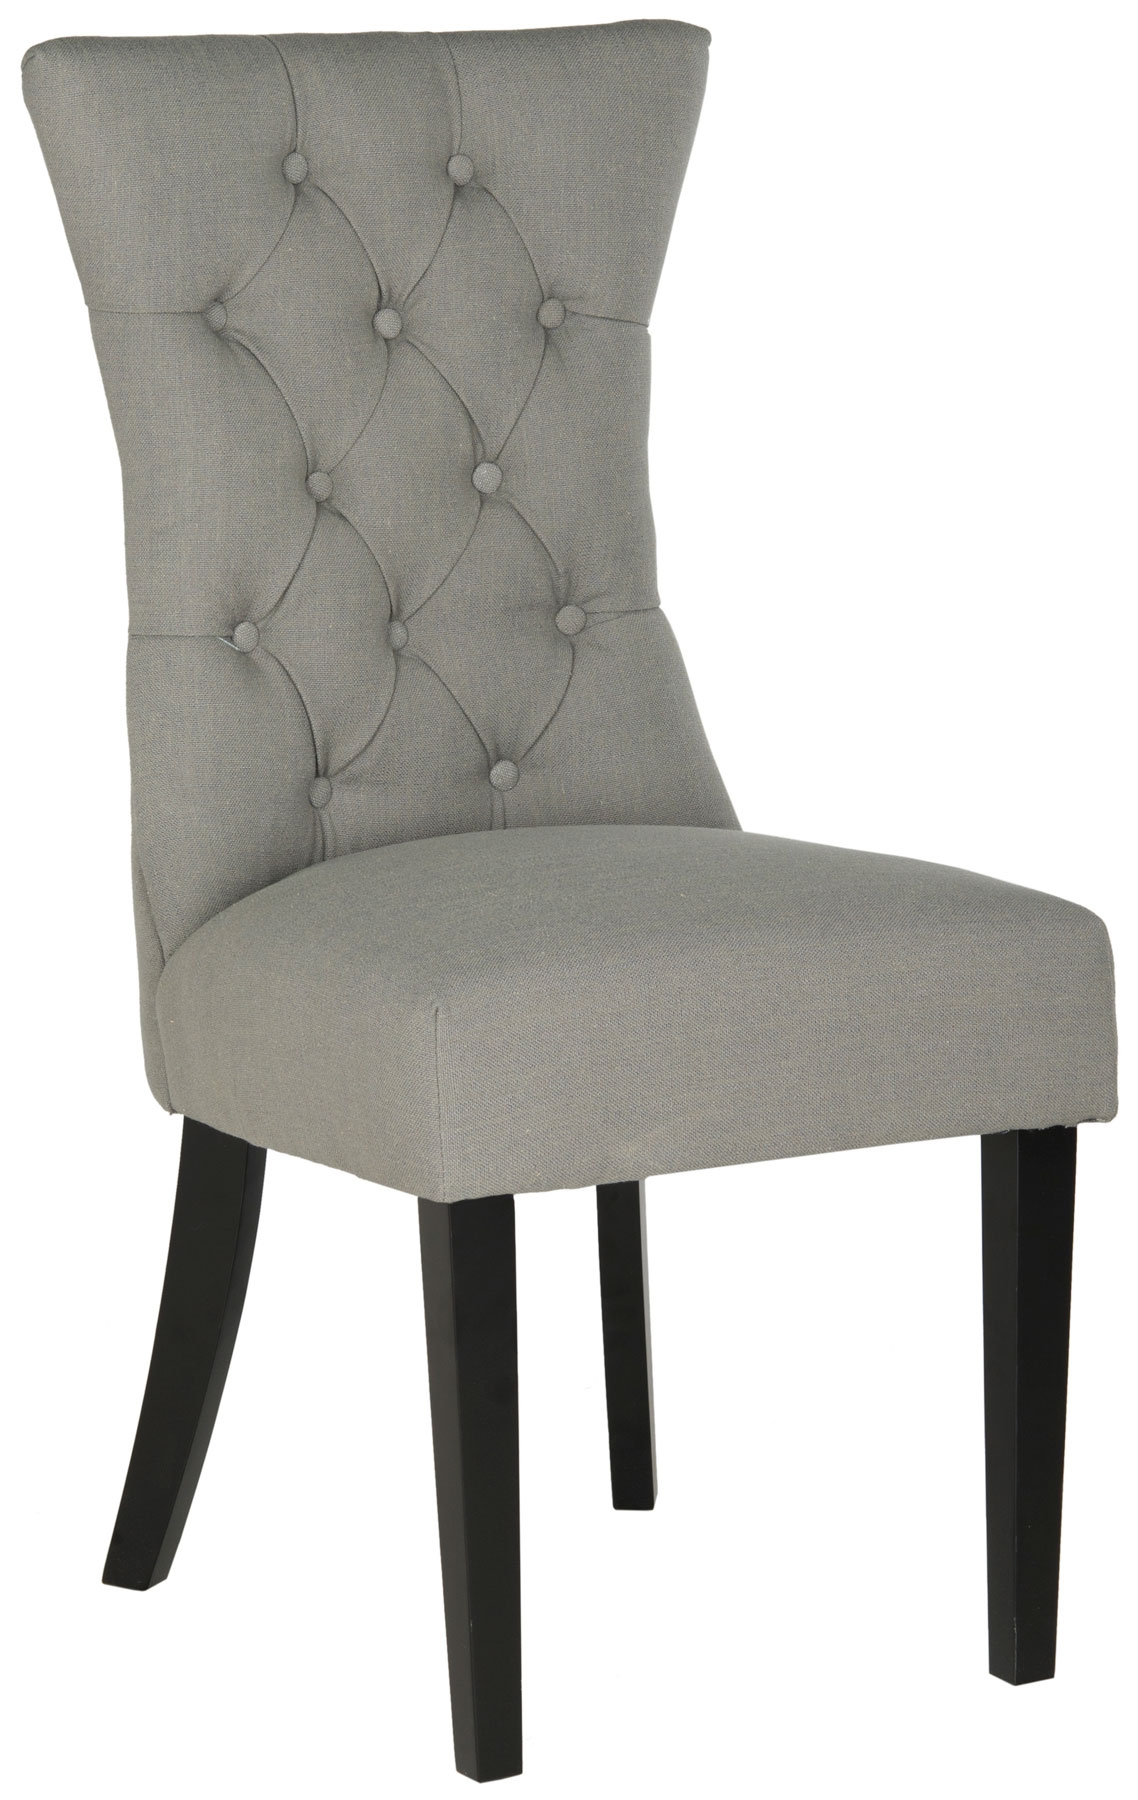 Gretchen 21''H Tufted Side Chair (Set Of 2) - Granite/Black - Arlo Home - Image 2